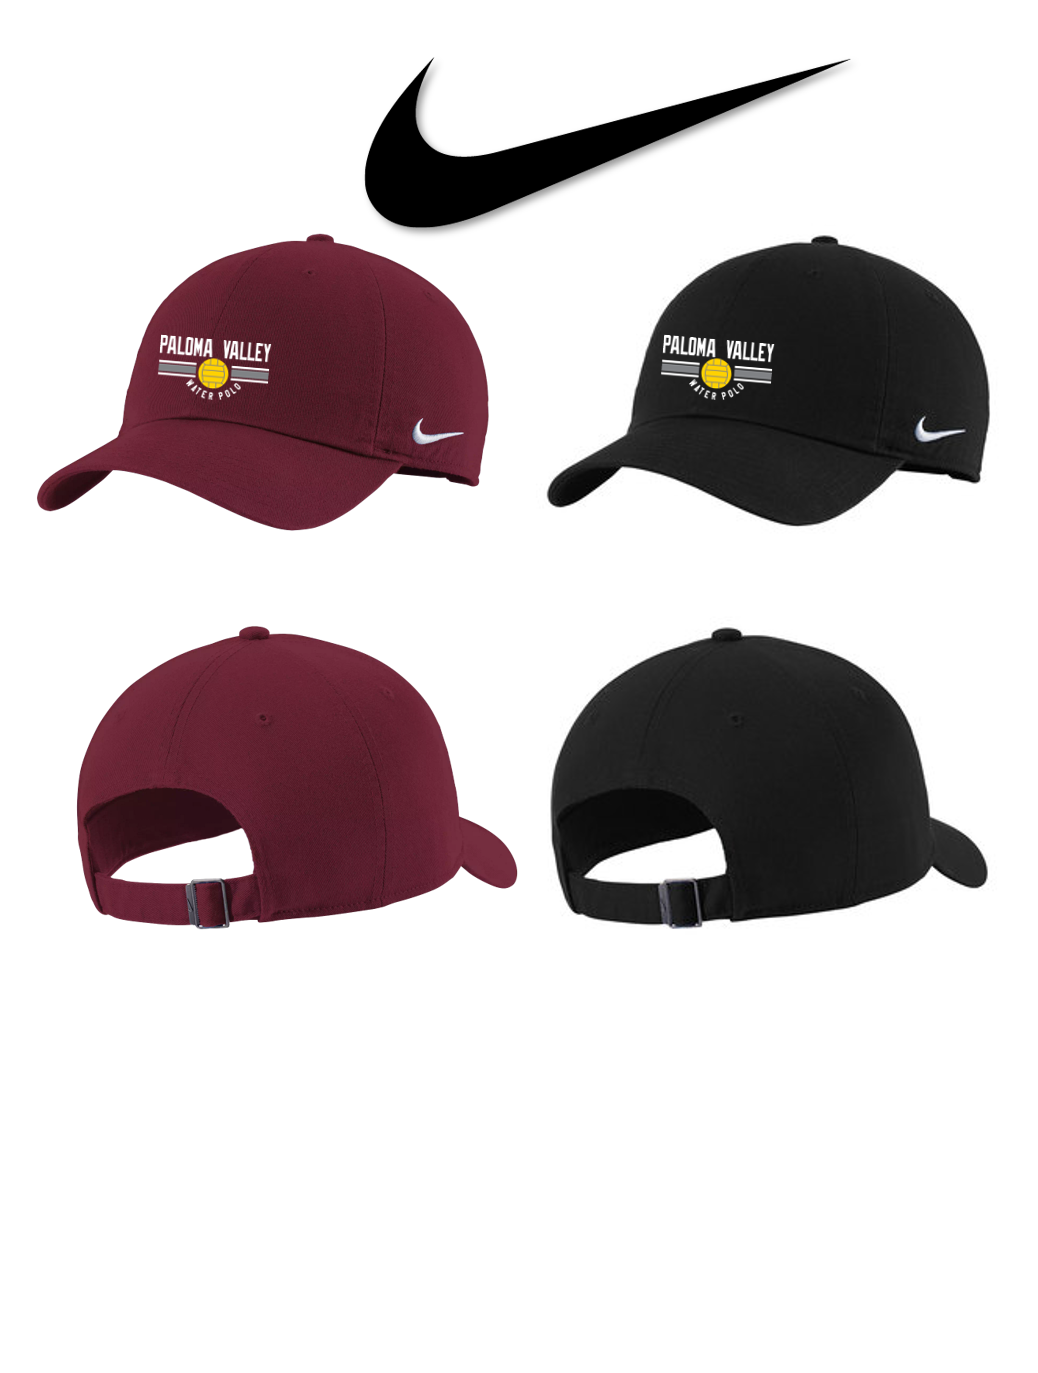 *Nike Heritage 86 Cap - PALOMA VALLEY WATER POLO